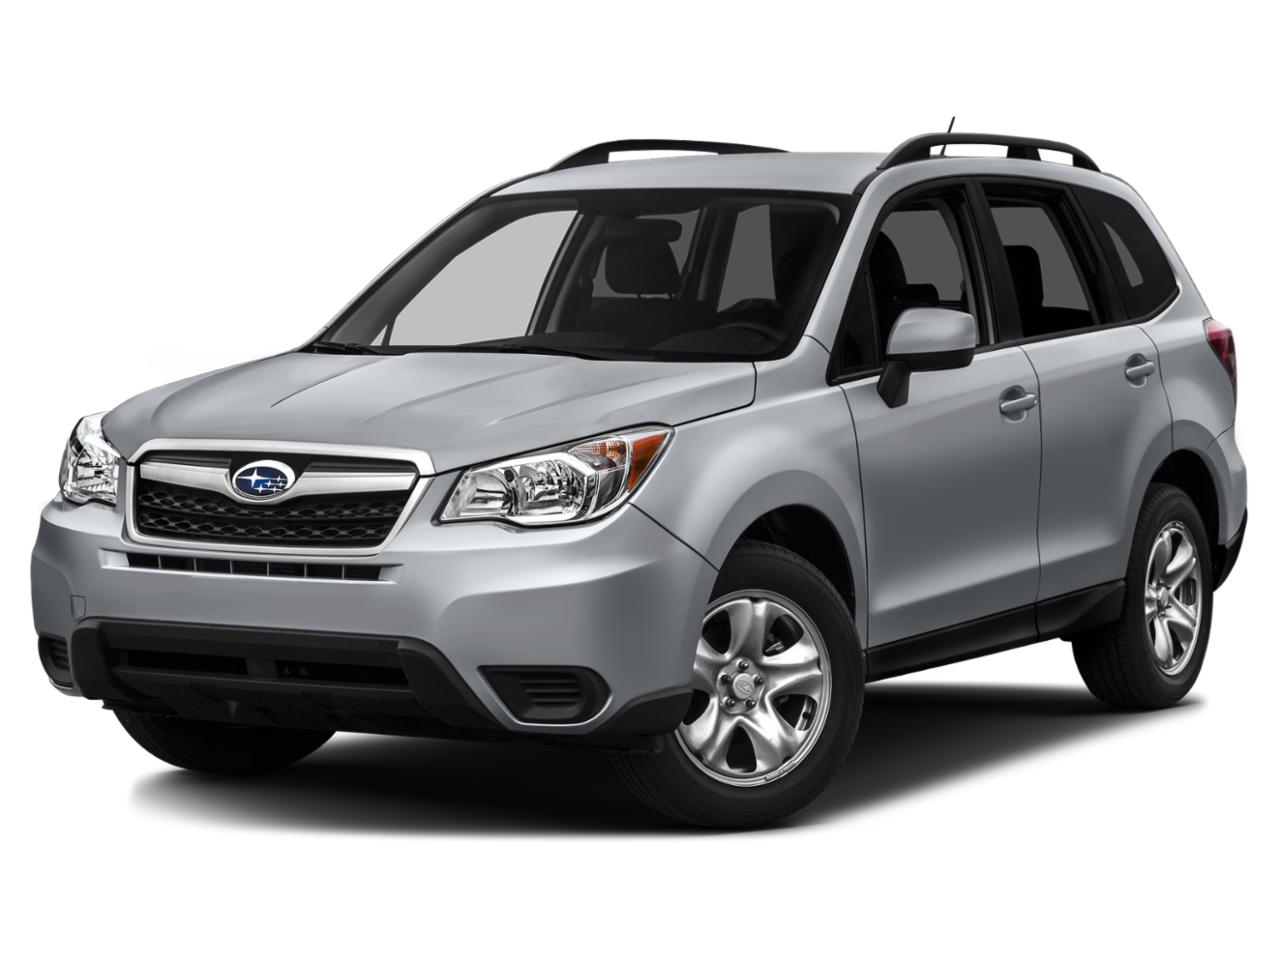 2015 Subaru Forester Vehicle Photo in Allentown, PA 18103